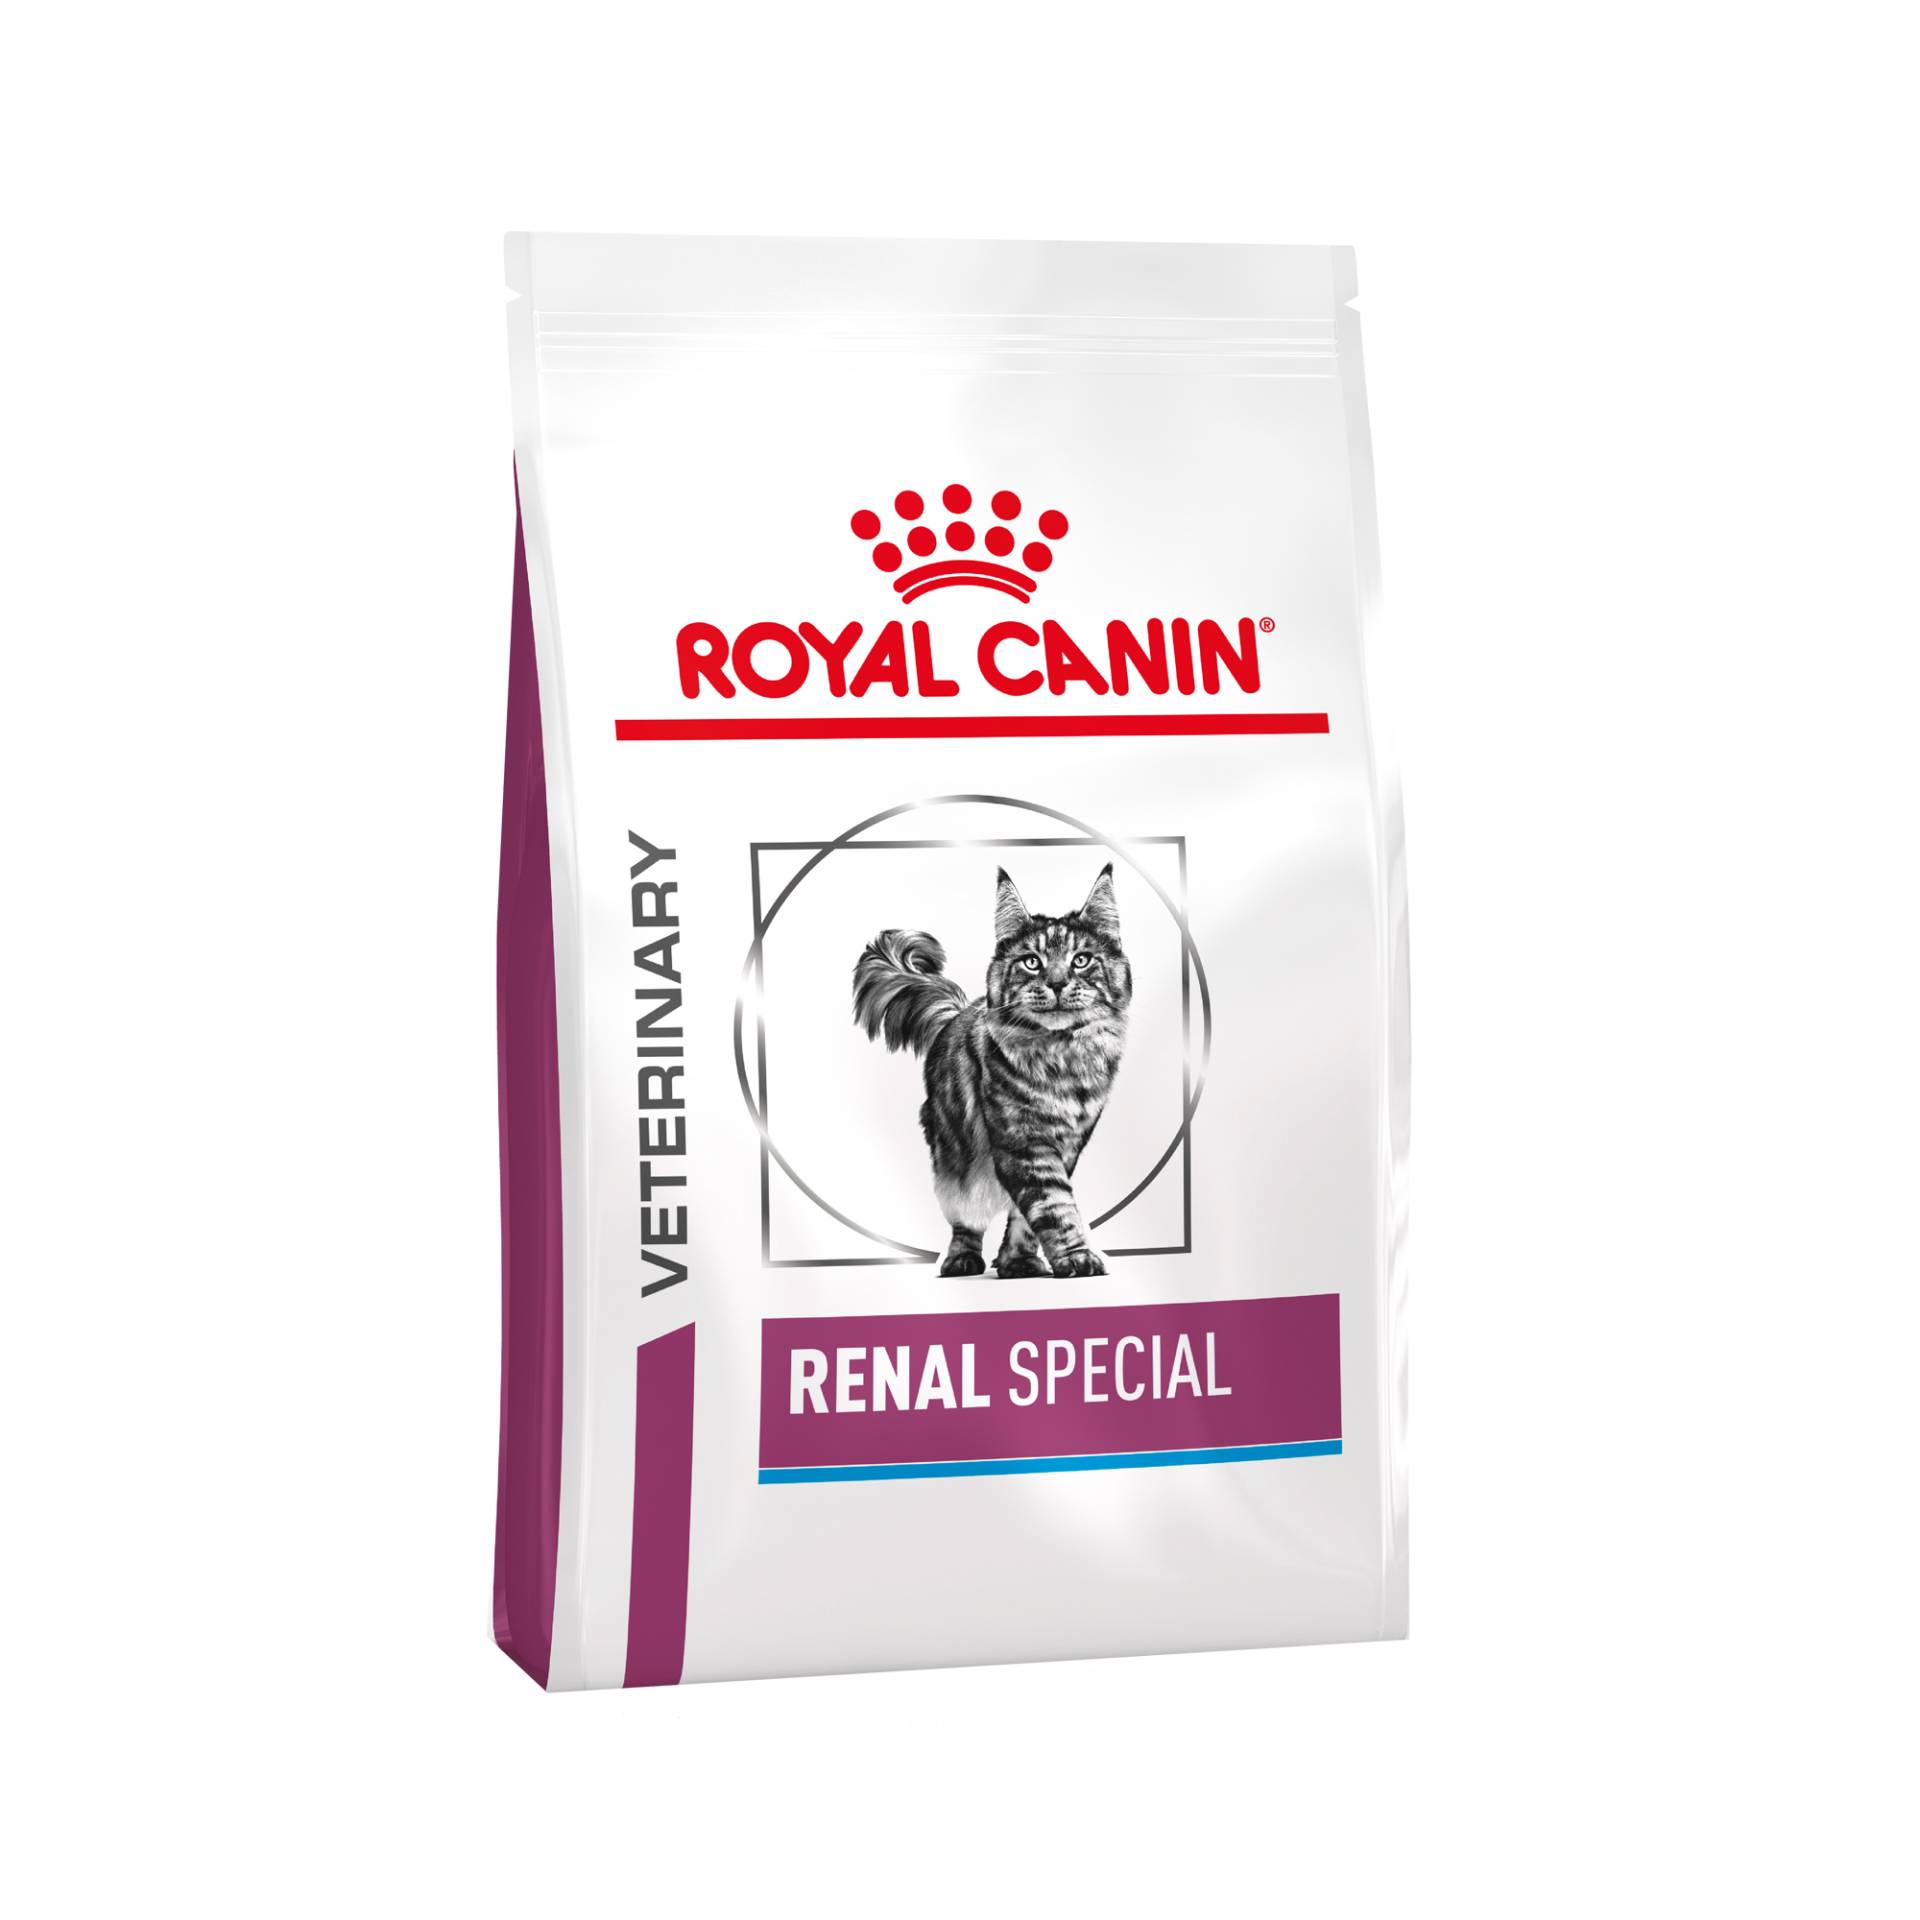 Royal Canin Renal Special Katze (RSF 26) 2 kg von Royal Canin